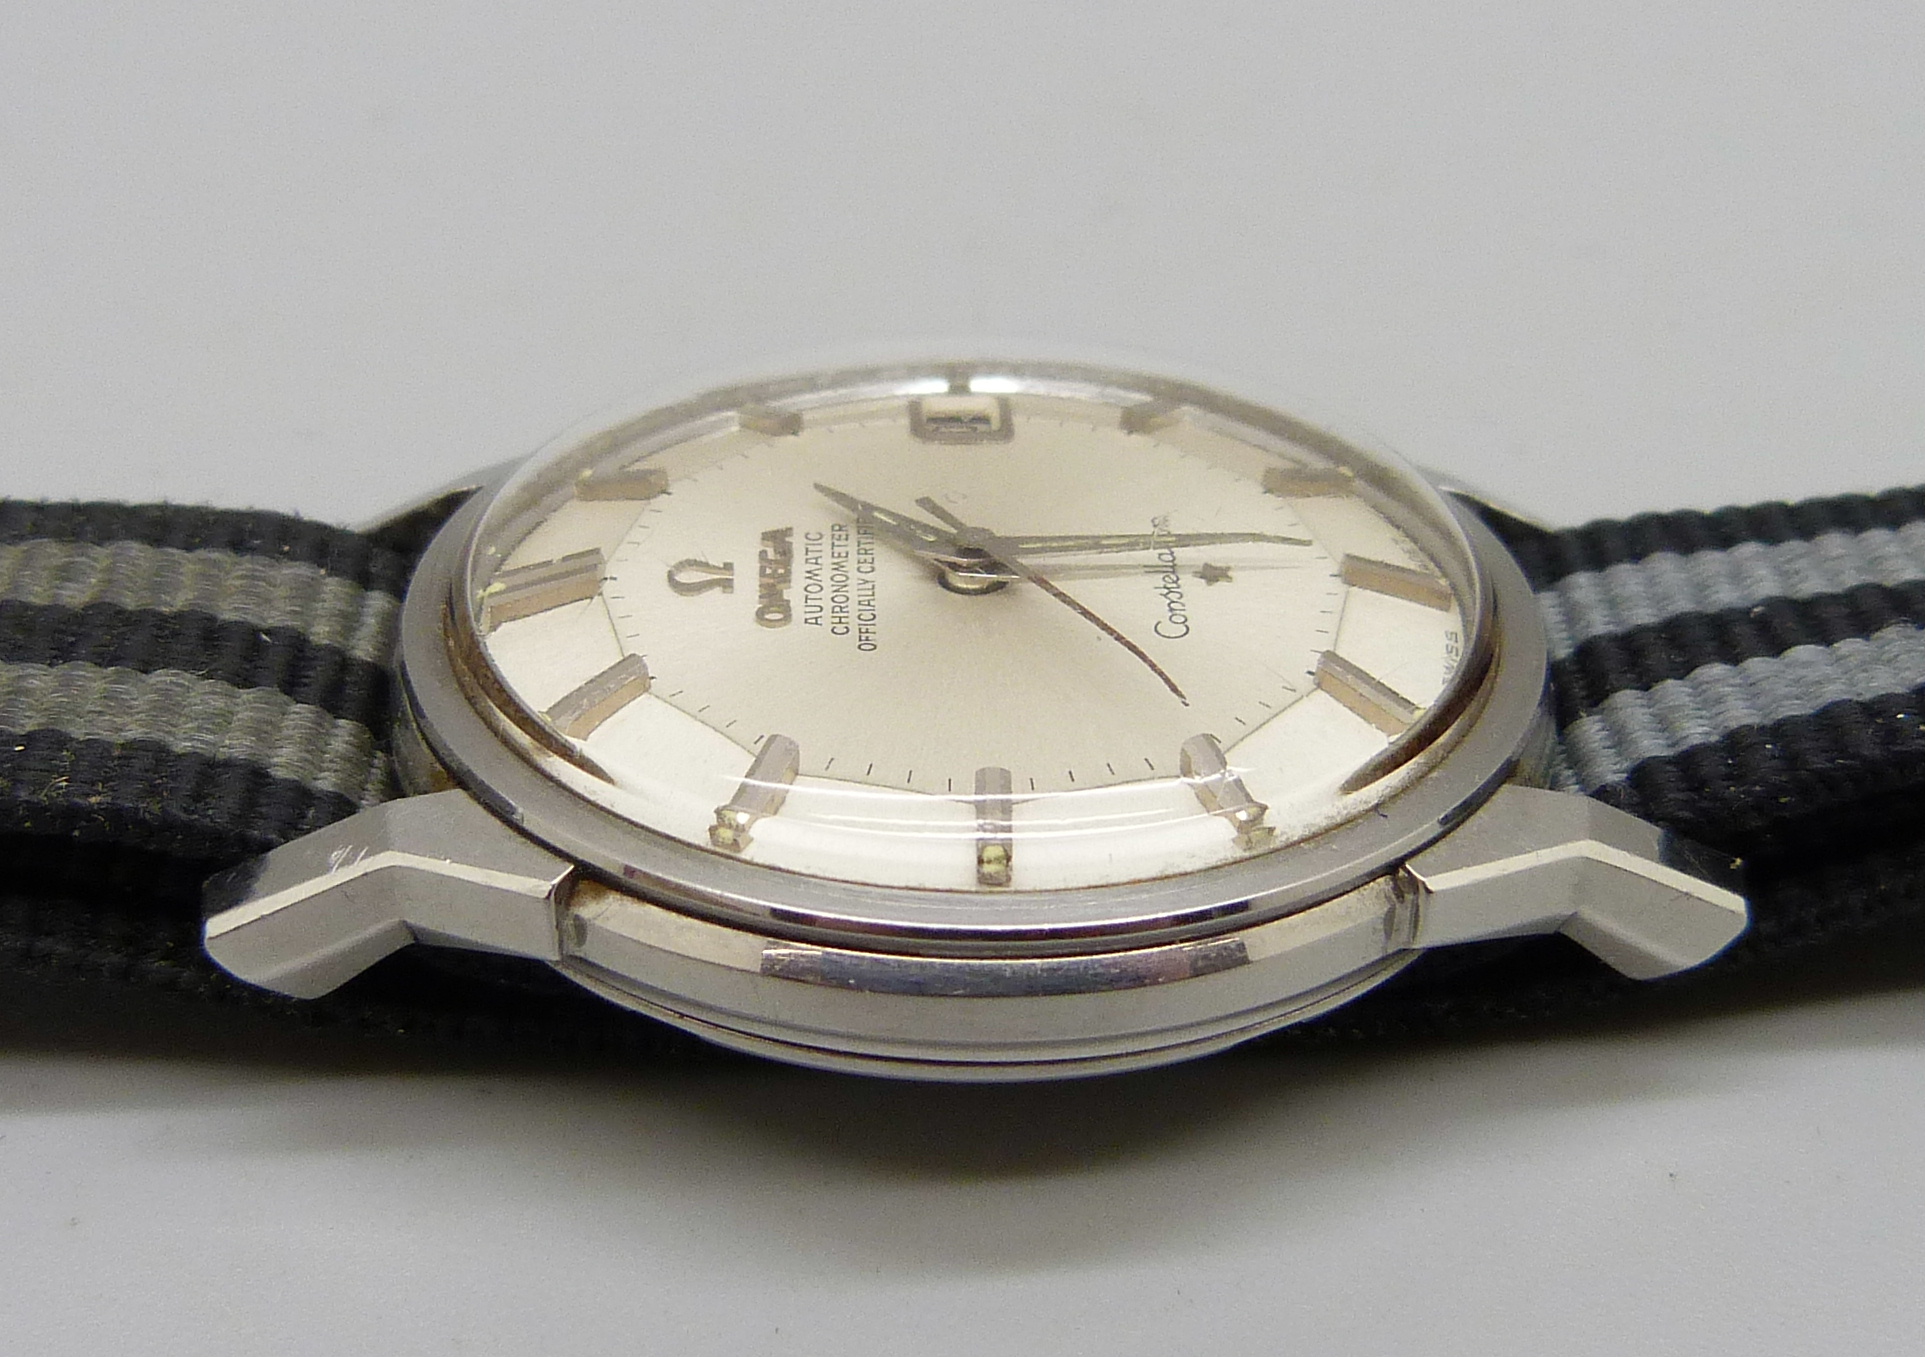 An Omega Constellation automatic chronometer wristwatch with pie pan dial, with original Omega glass - Image 3 of 7